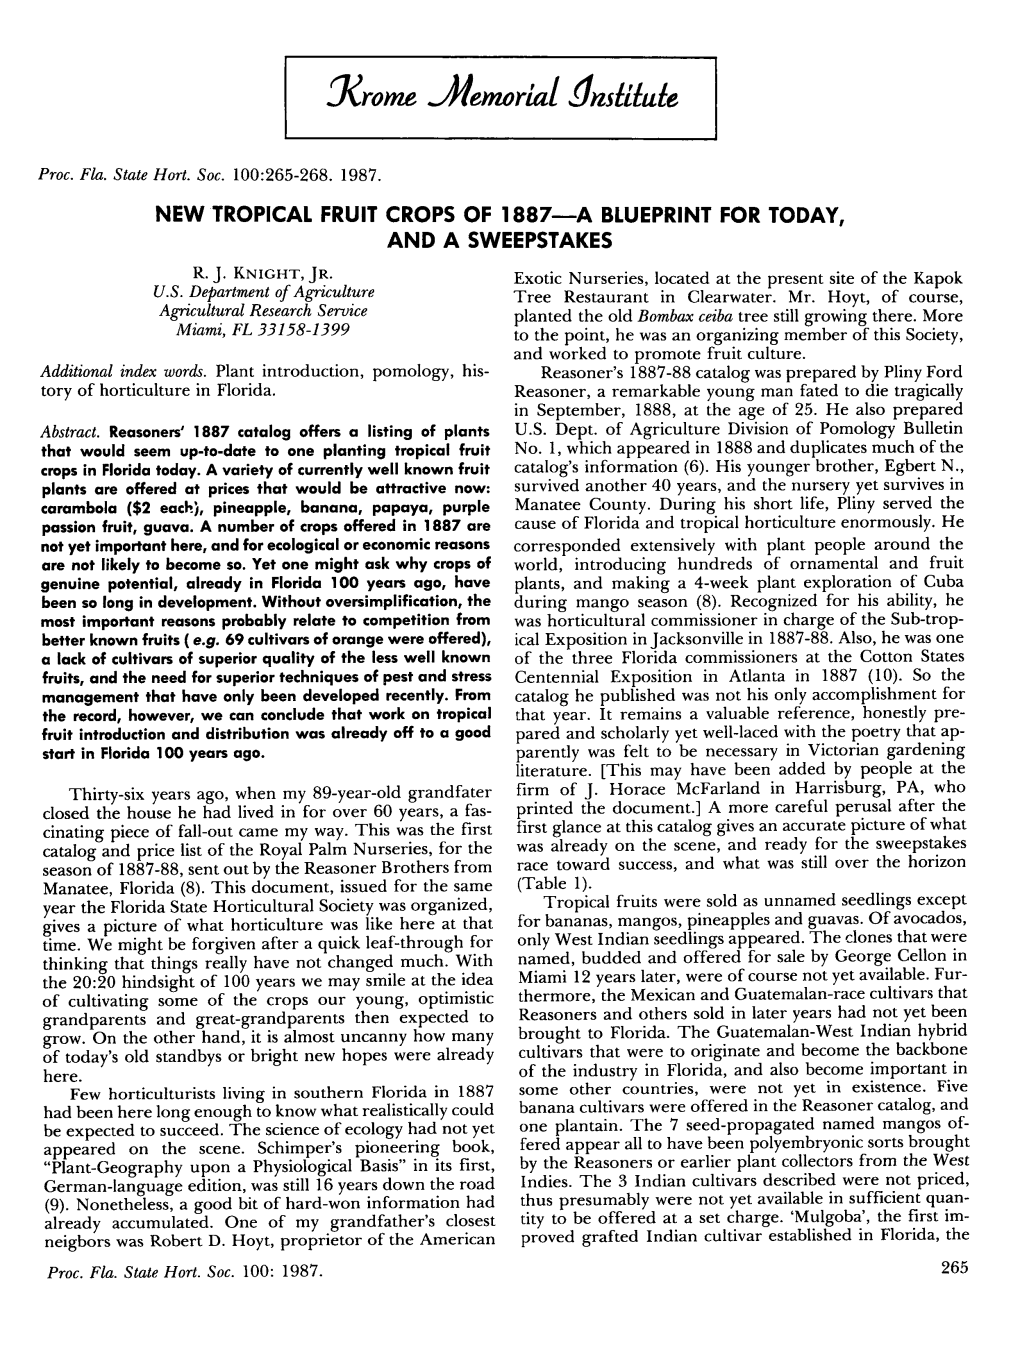 New Tropical Fruit Crops of 1887—A Blueprint for Today, and a Sweepstakes